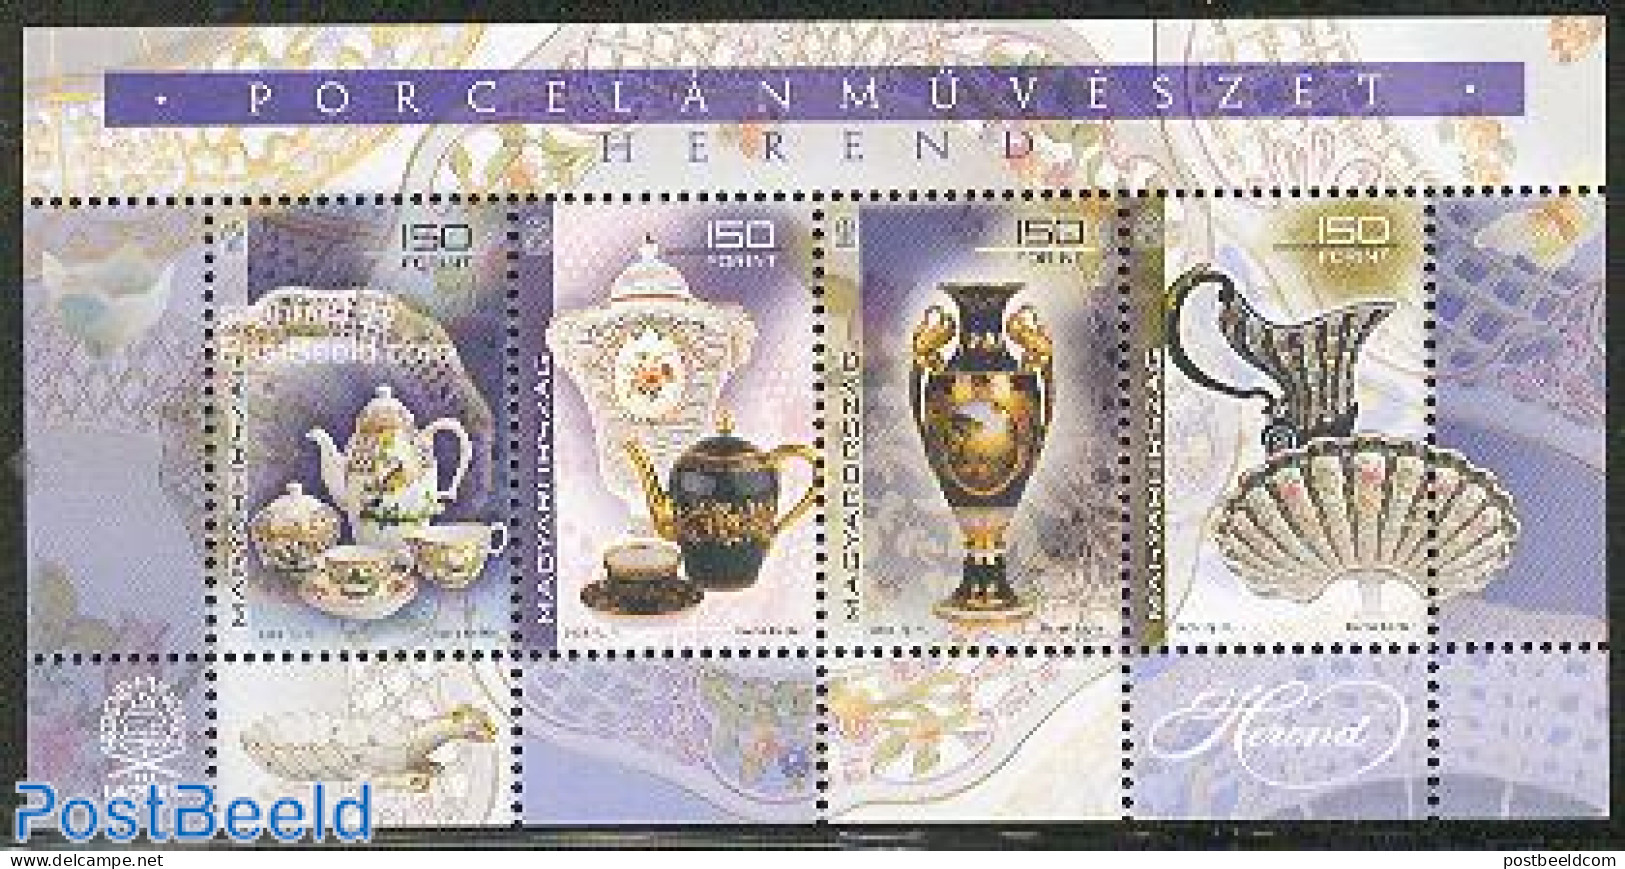 Hungary 2003 Chinese Porcelain S/s, Mint NH, Art - Art & Antique Objects - Ceramics - Unused Stamps